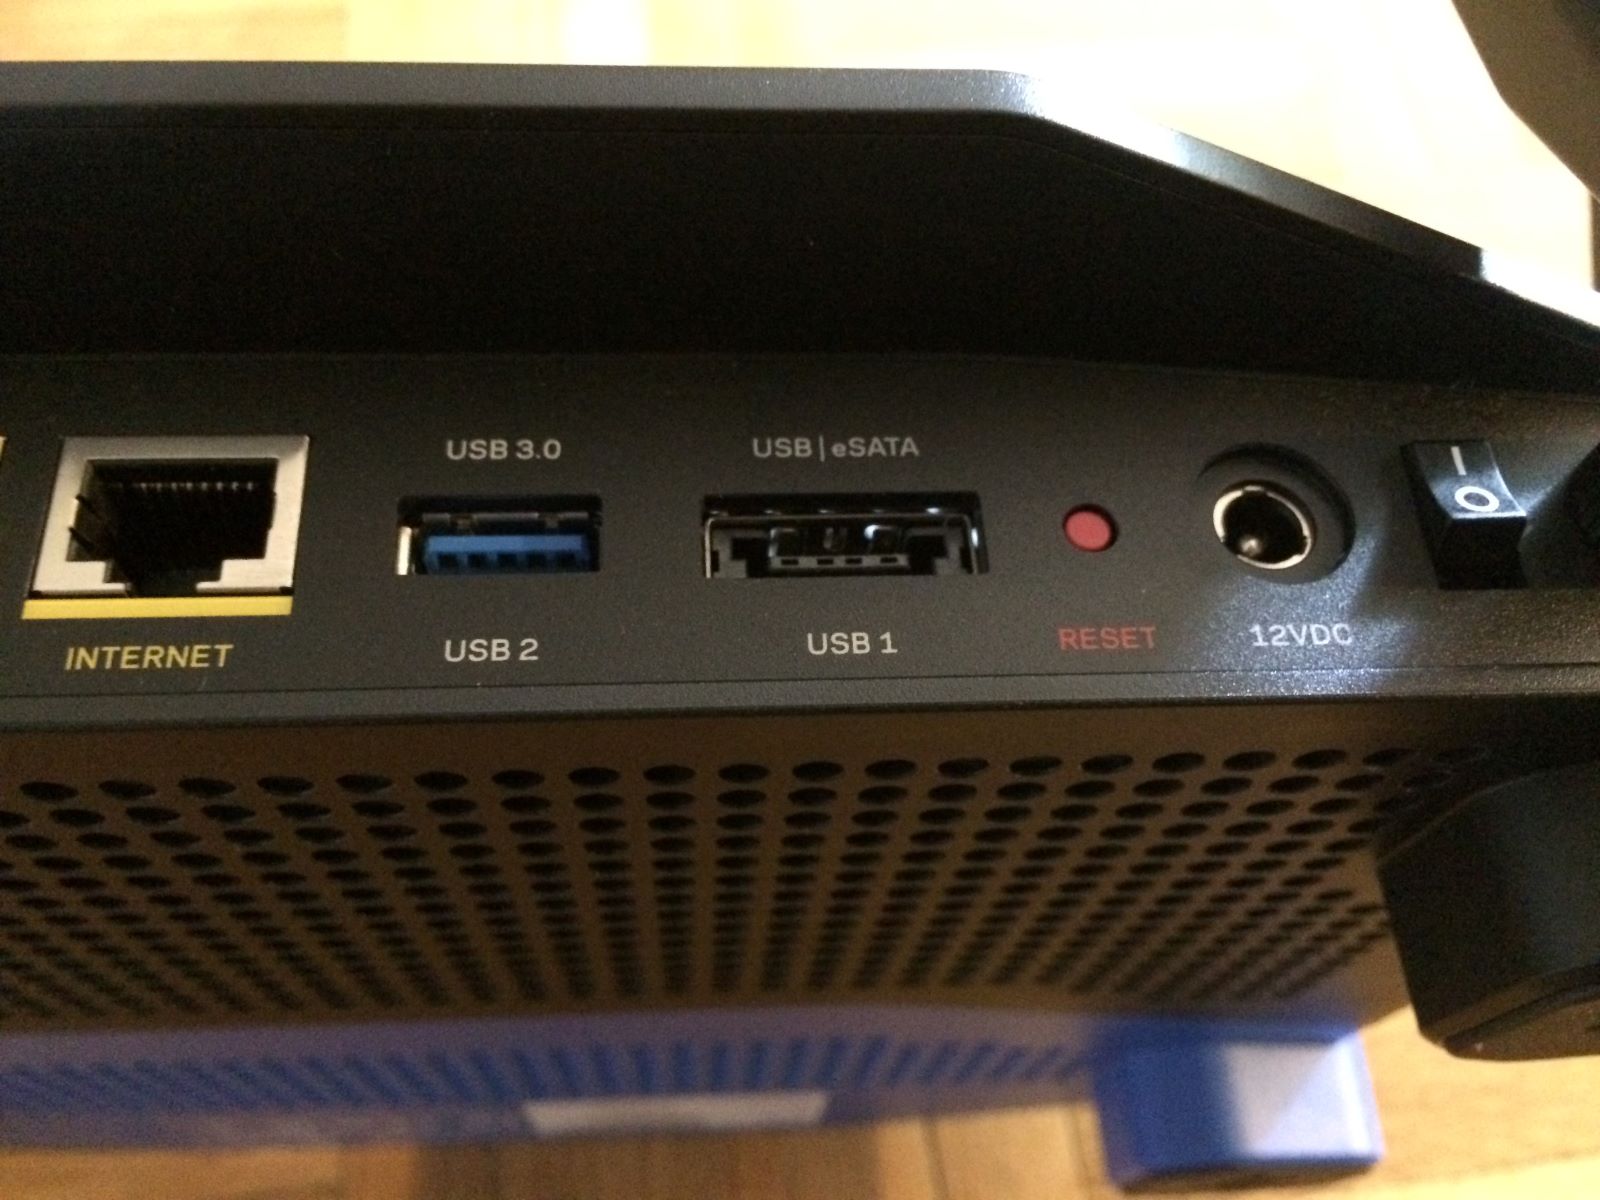 What Color Are The Lights Supposed To Be On My Linksys USB Hub?